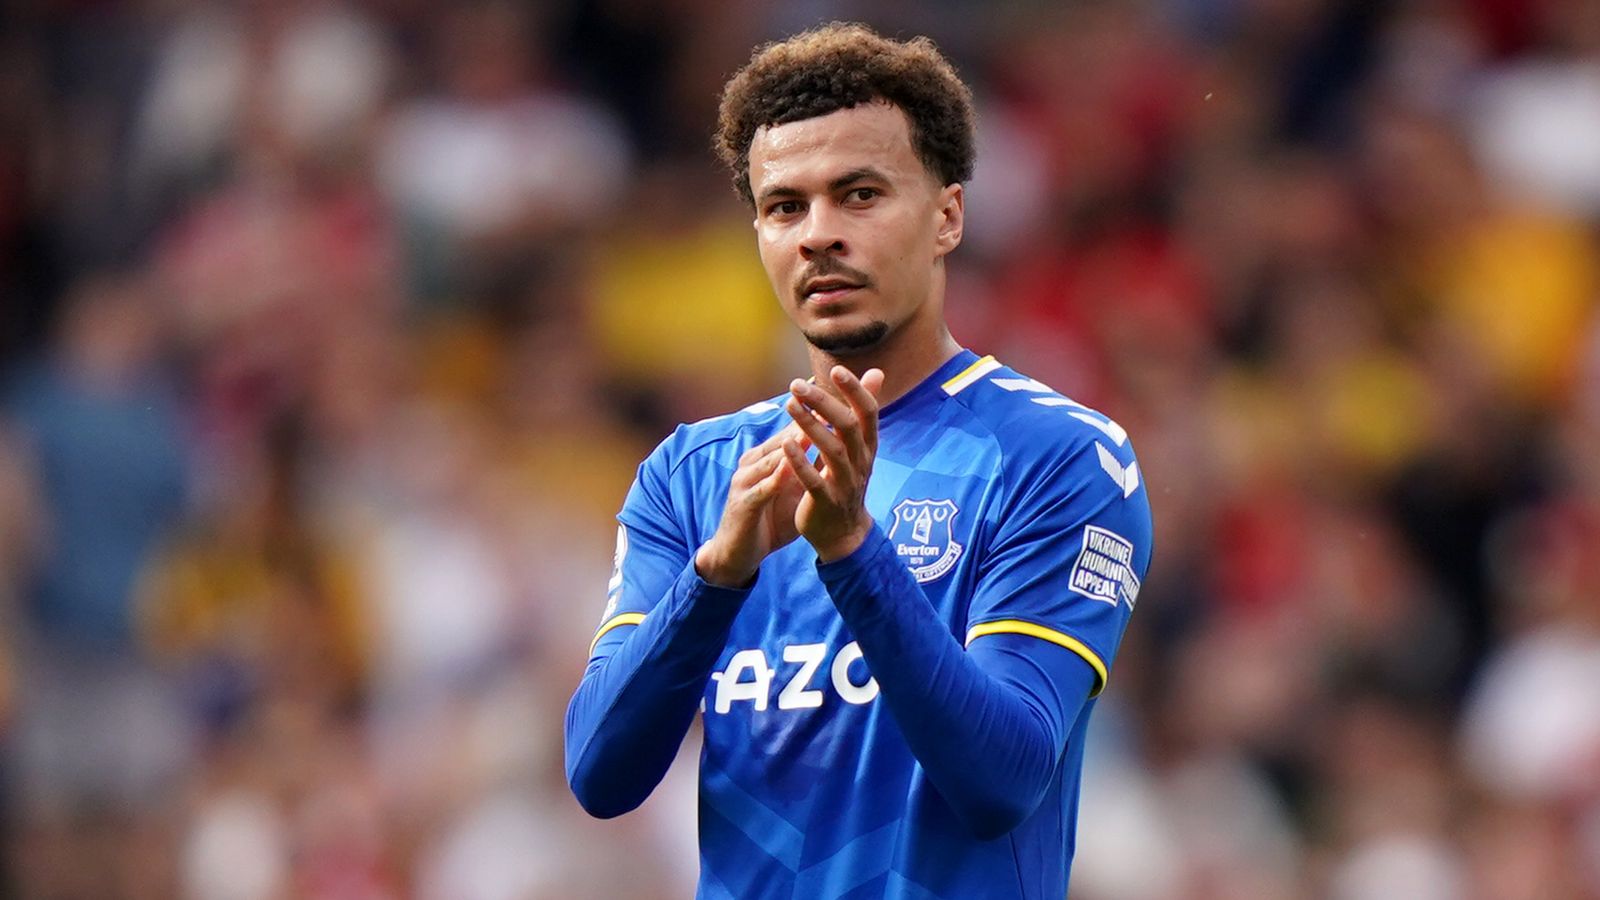 Dele wants to stay in the Premier League and is targeting a place in the England squad for the World Cup in 2026